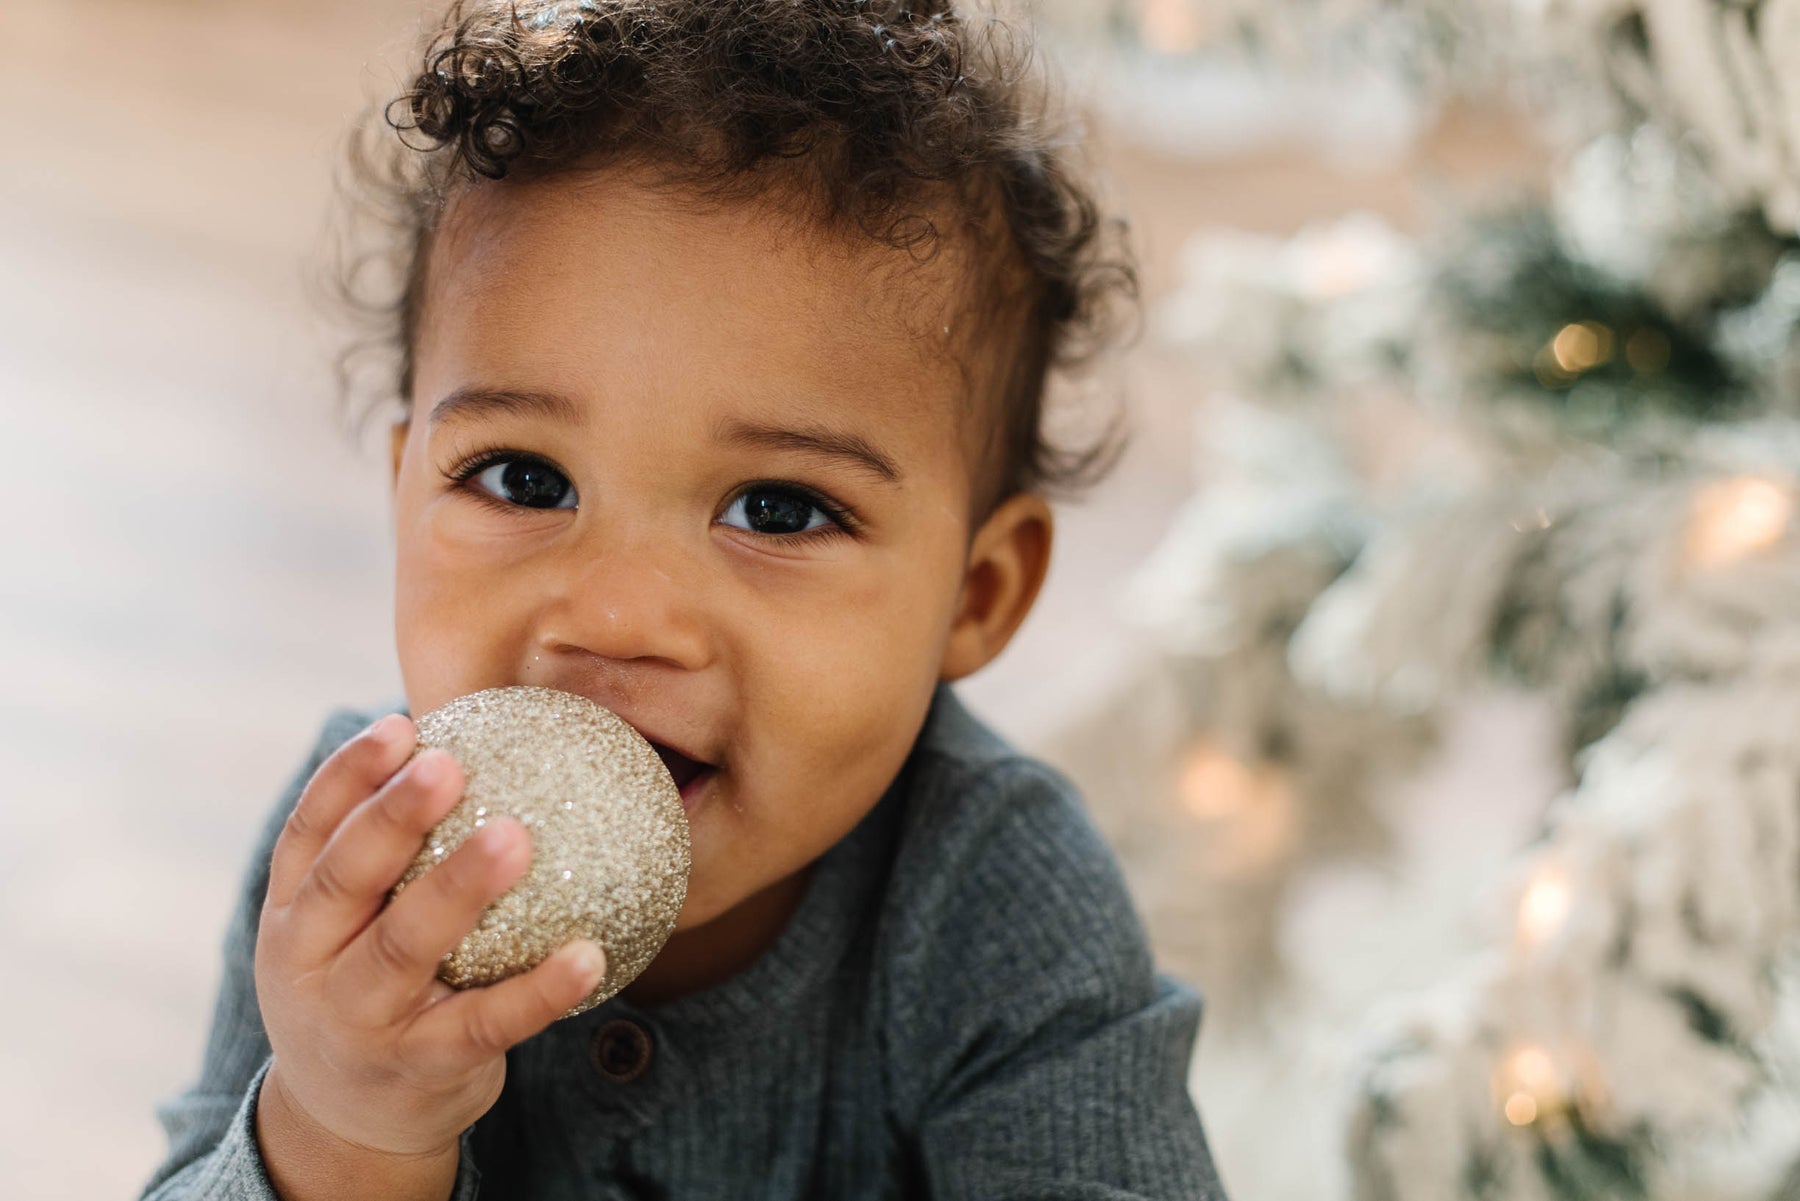 8 Ways to Have a More Stress-Free Christmas as a Parent